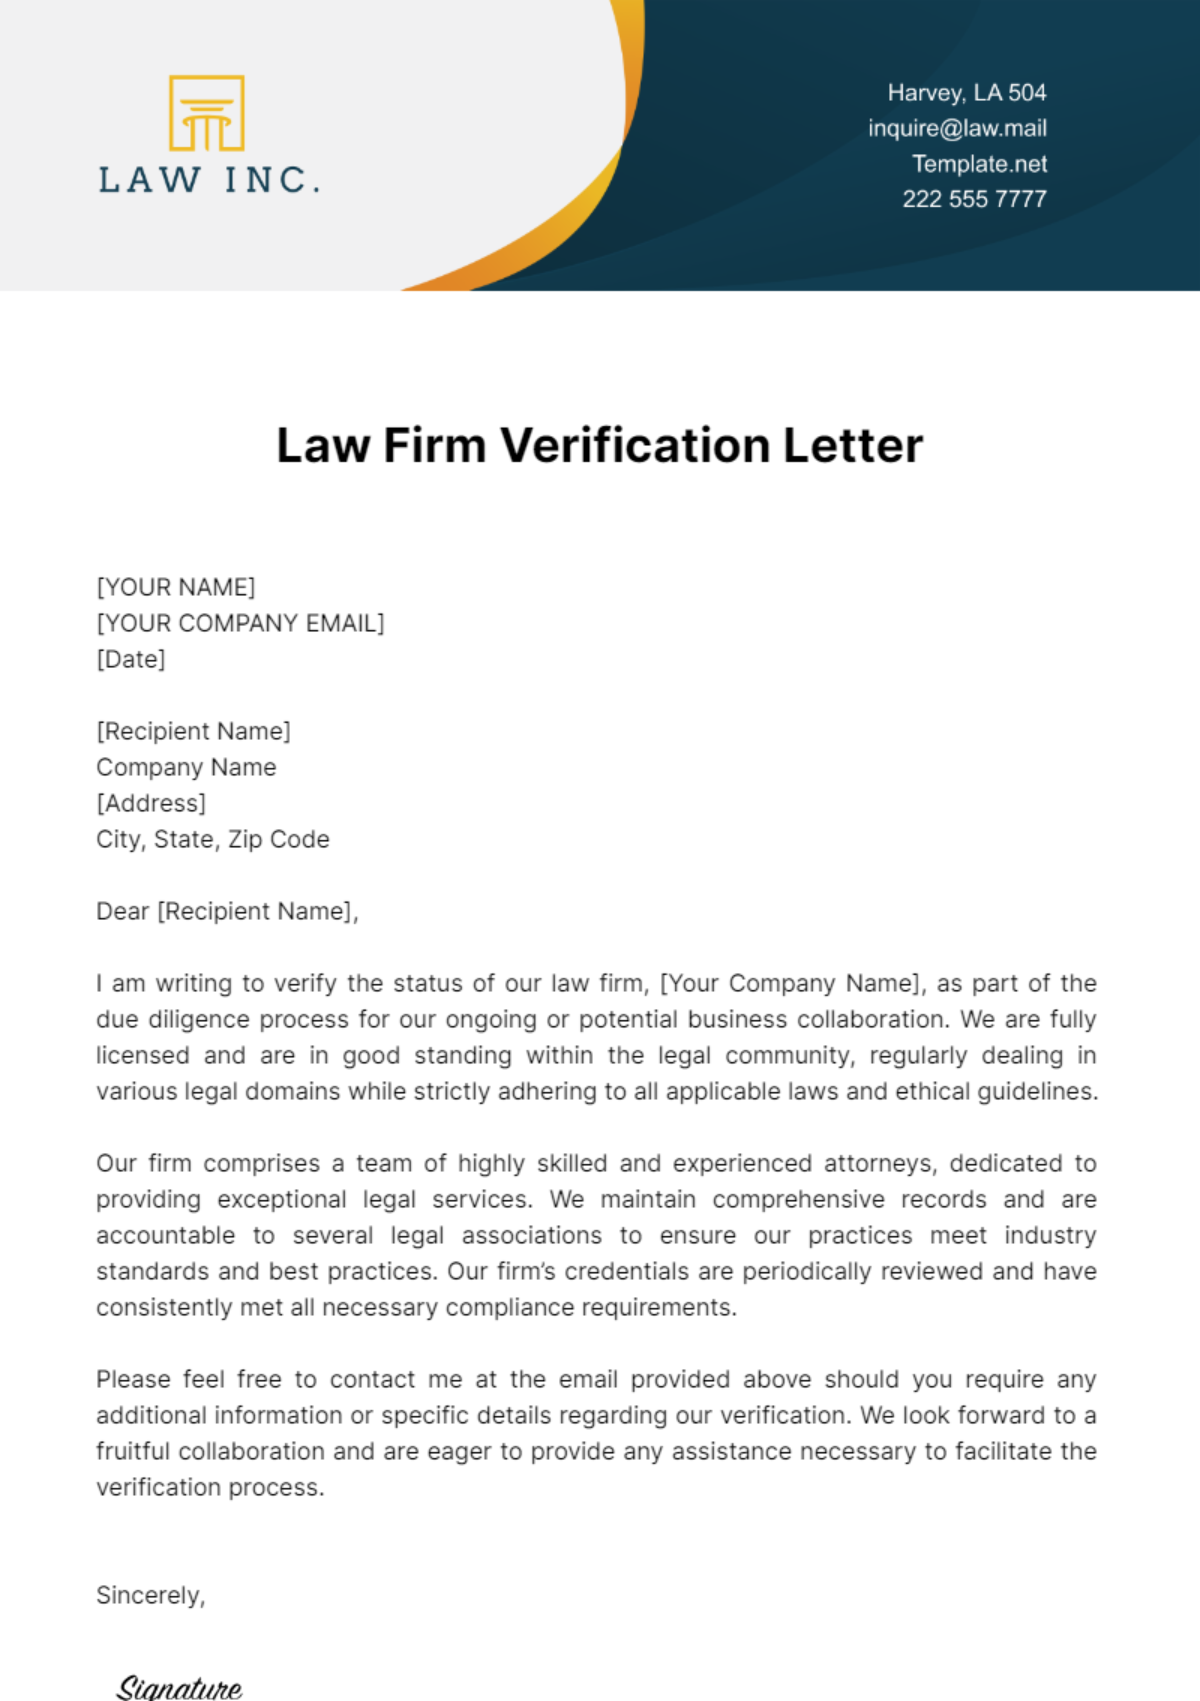 Law Firm Verification Letter Template